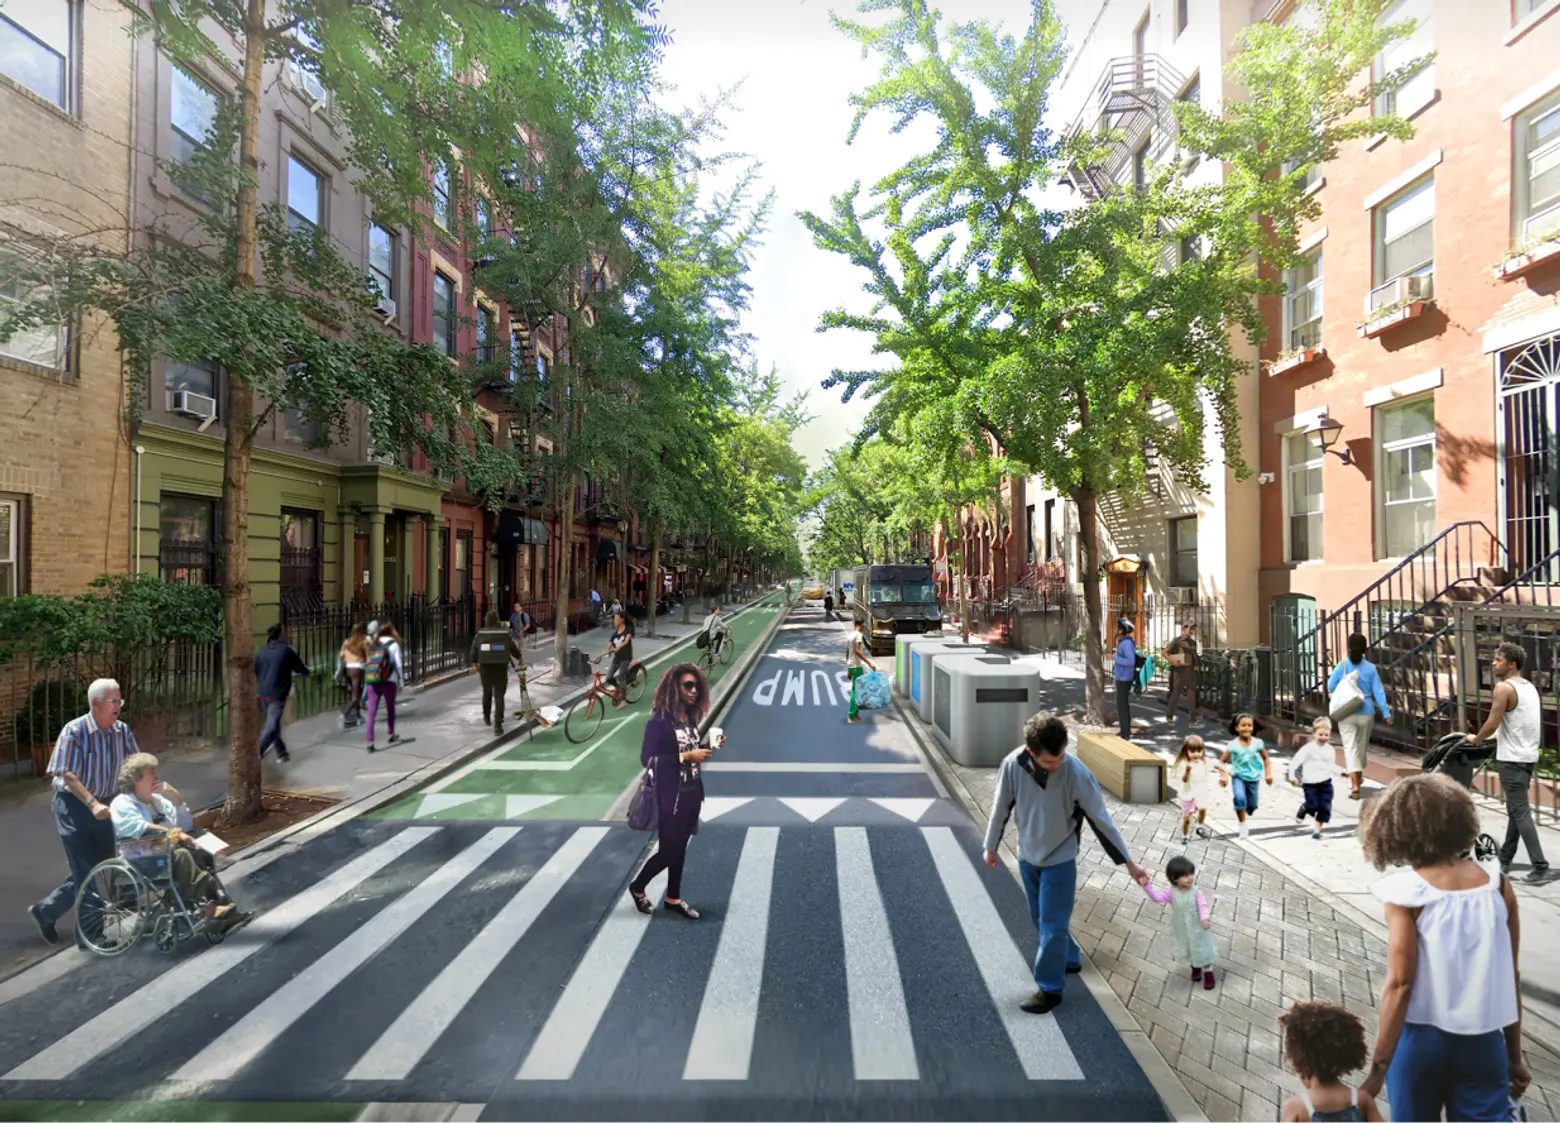 Here’s what a car-free, pedestrian-friendly NYC could look like